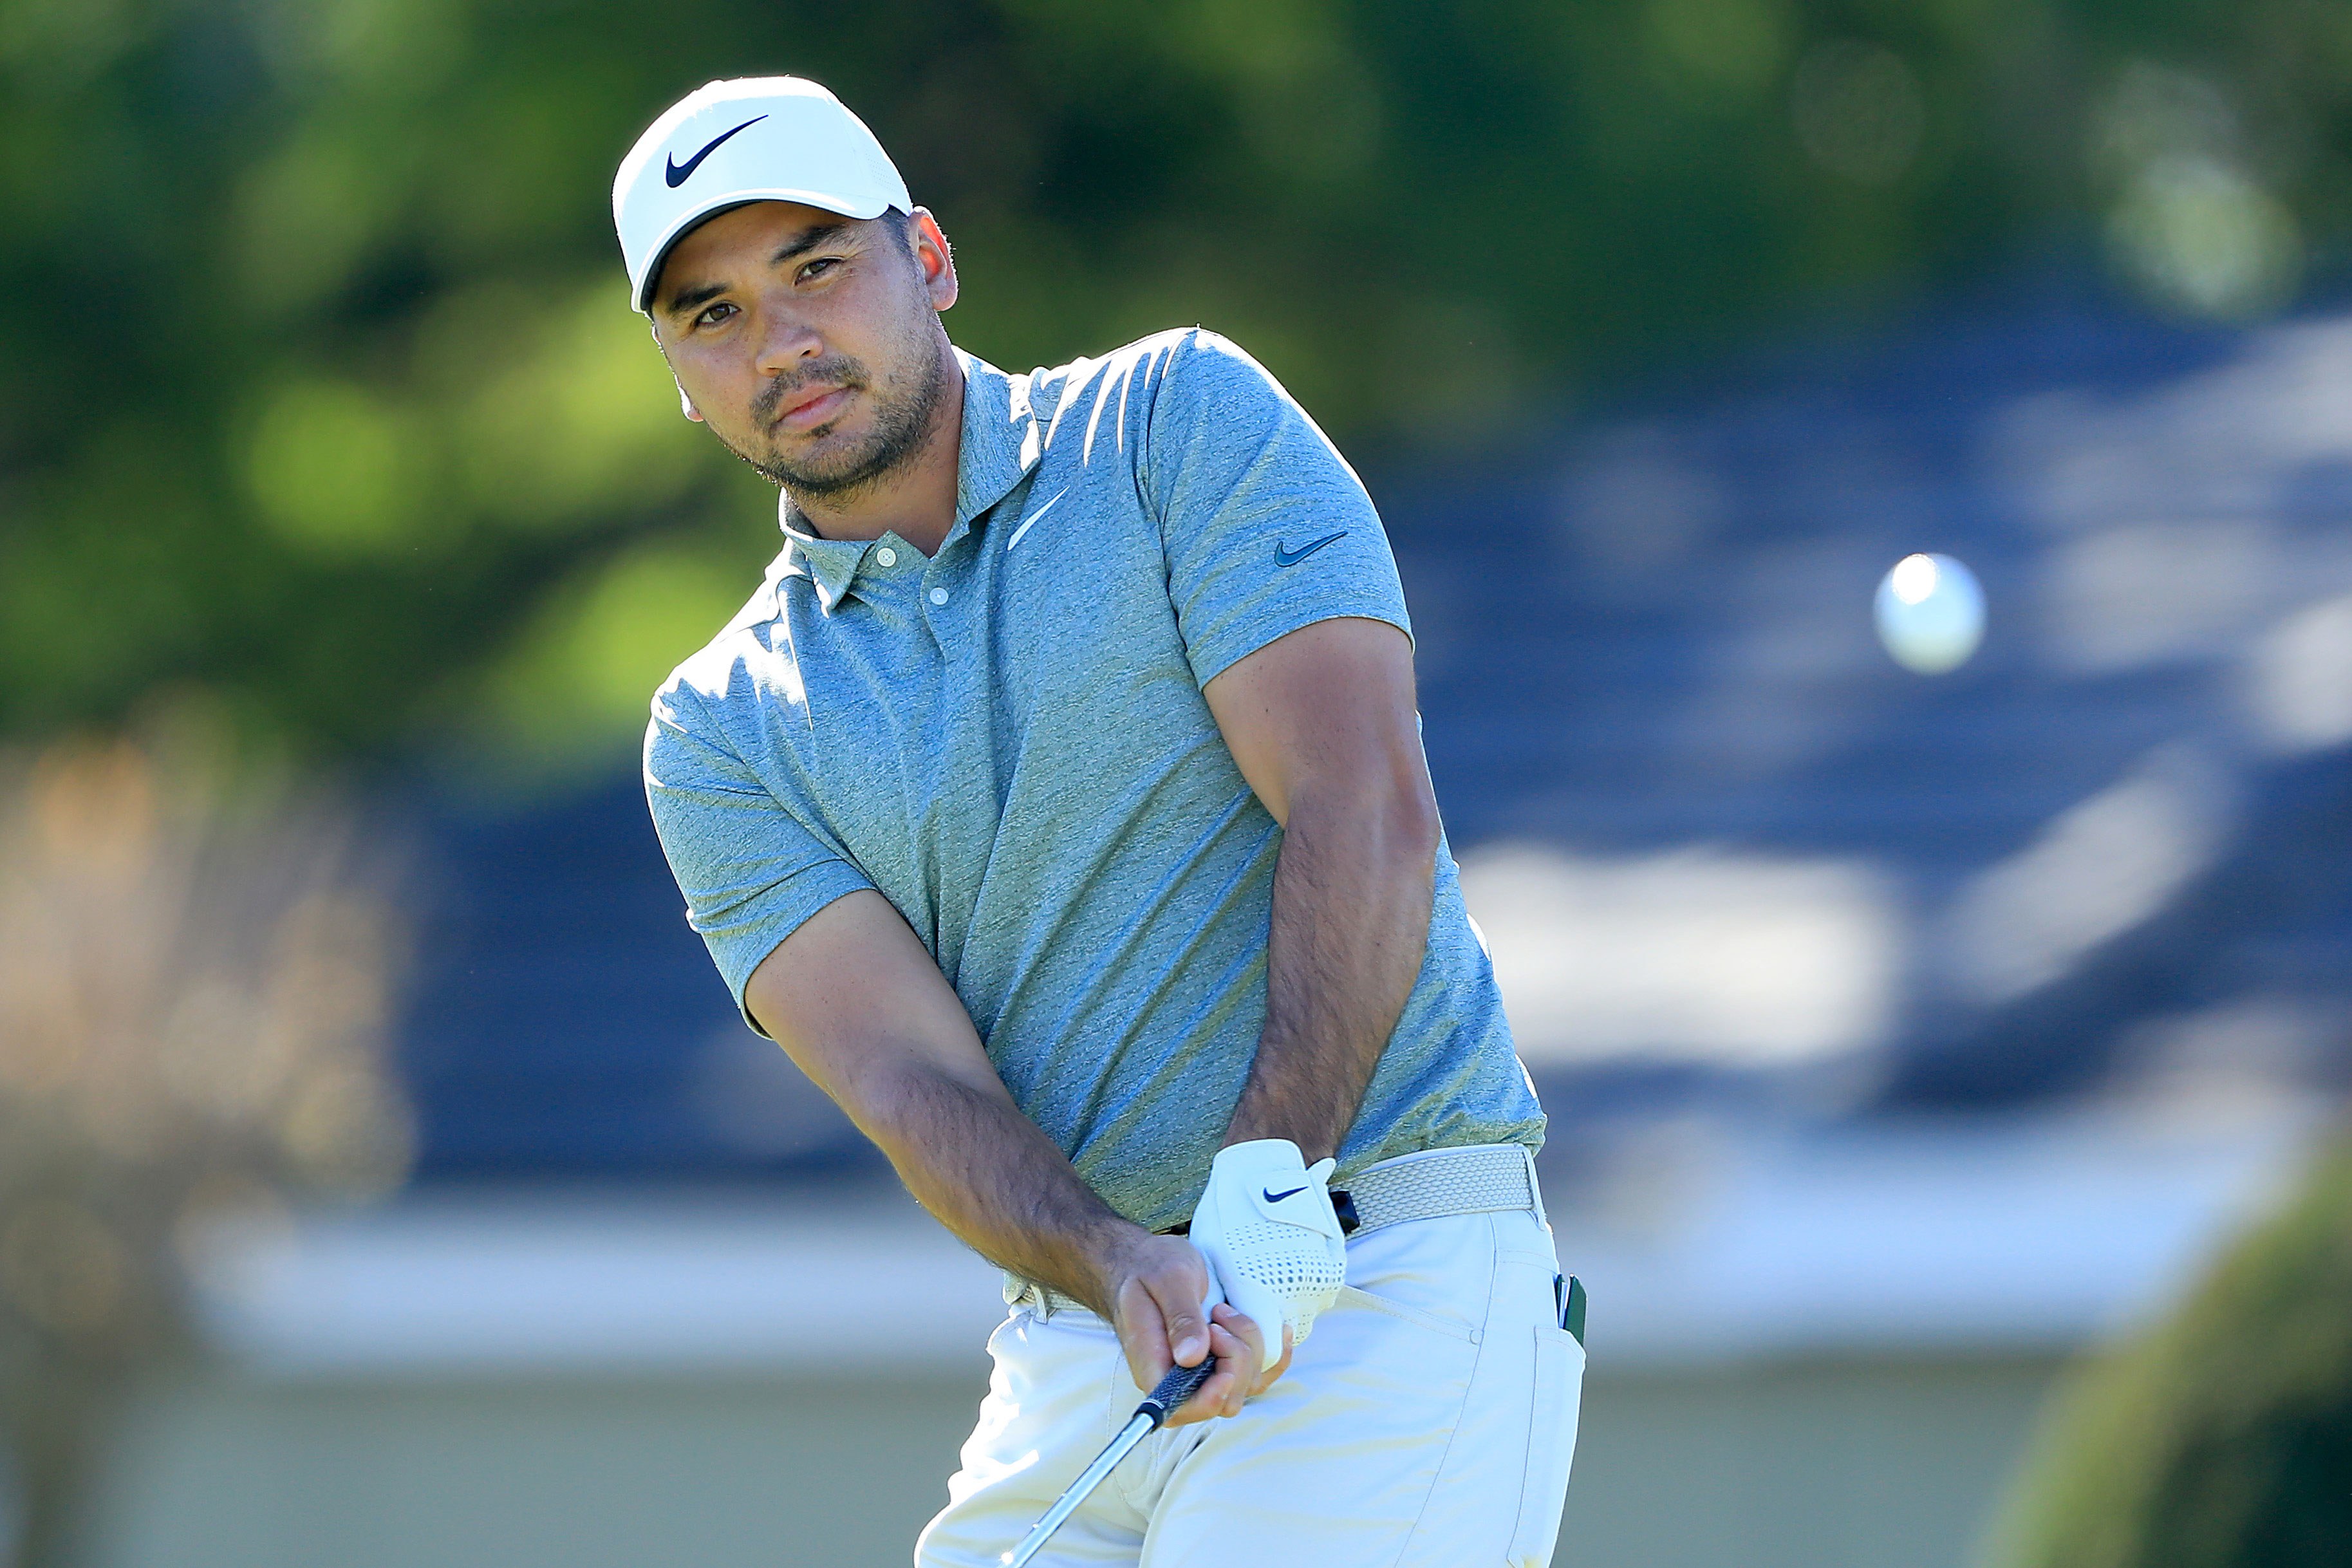 Jason Day ahead of US Open: I've severely underachieved